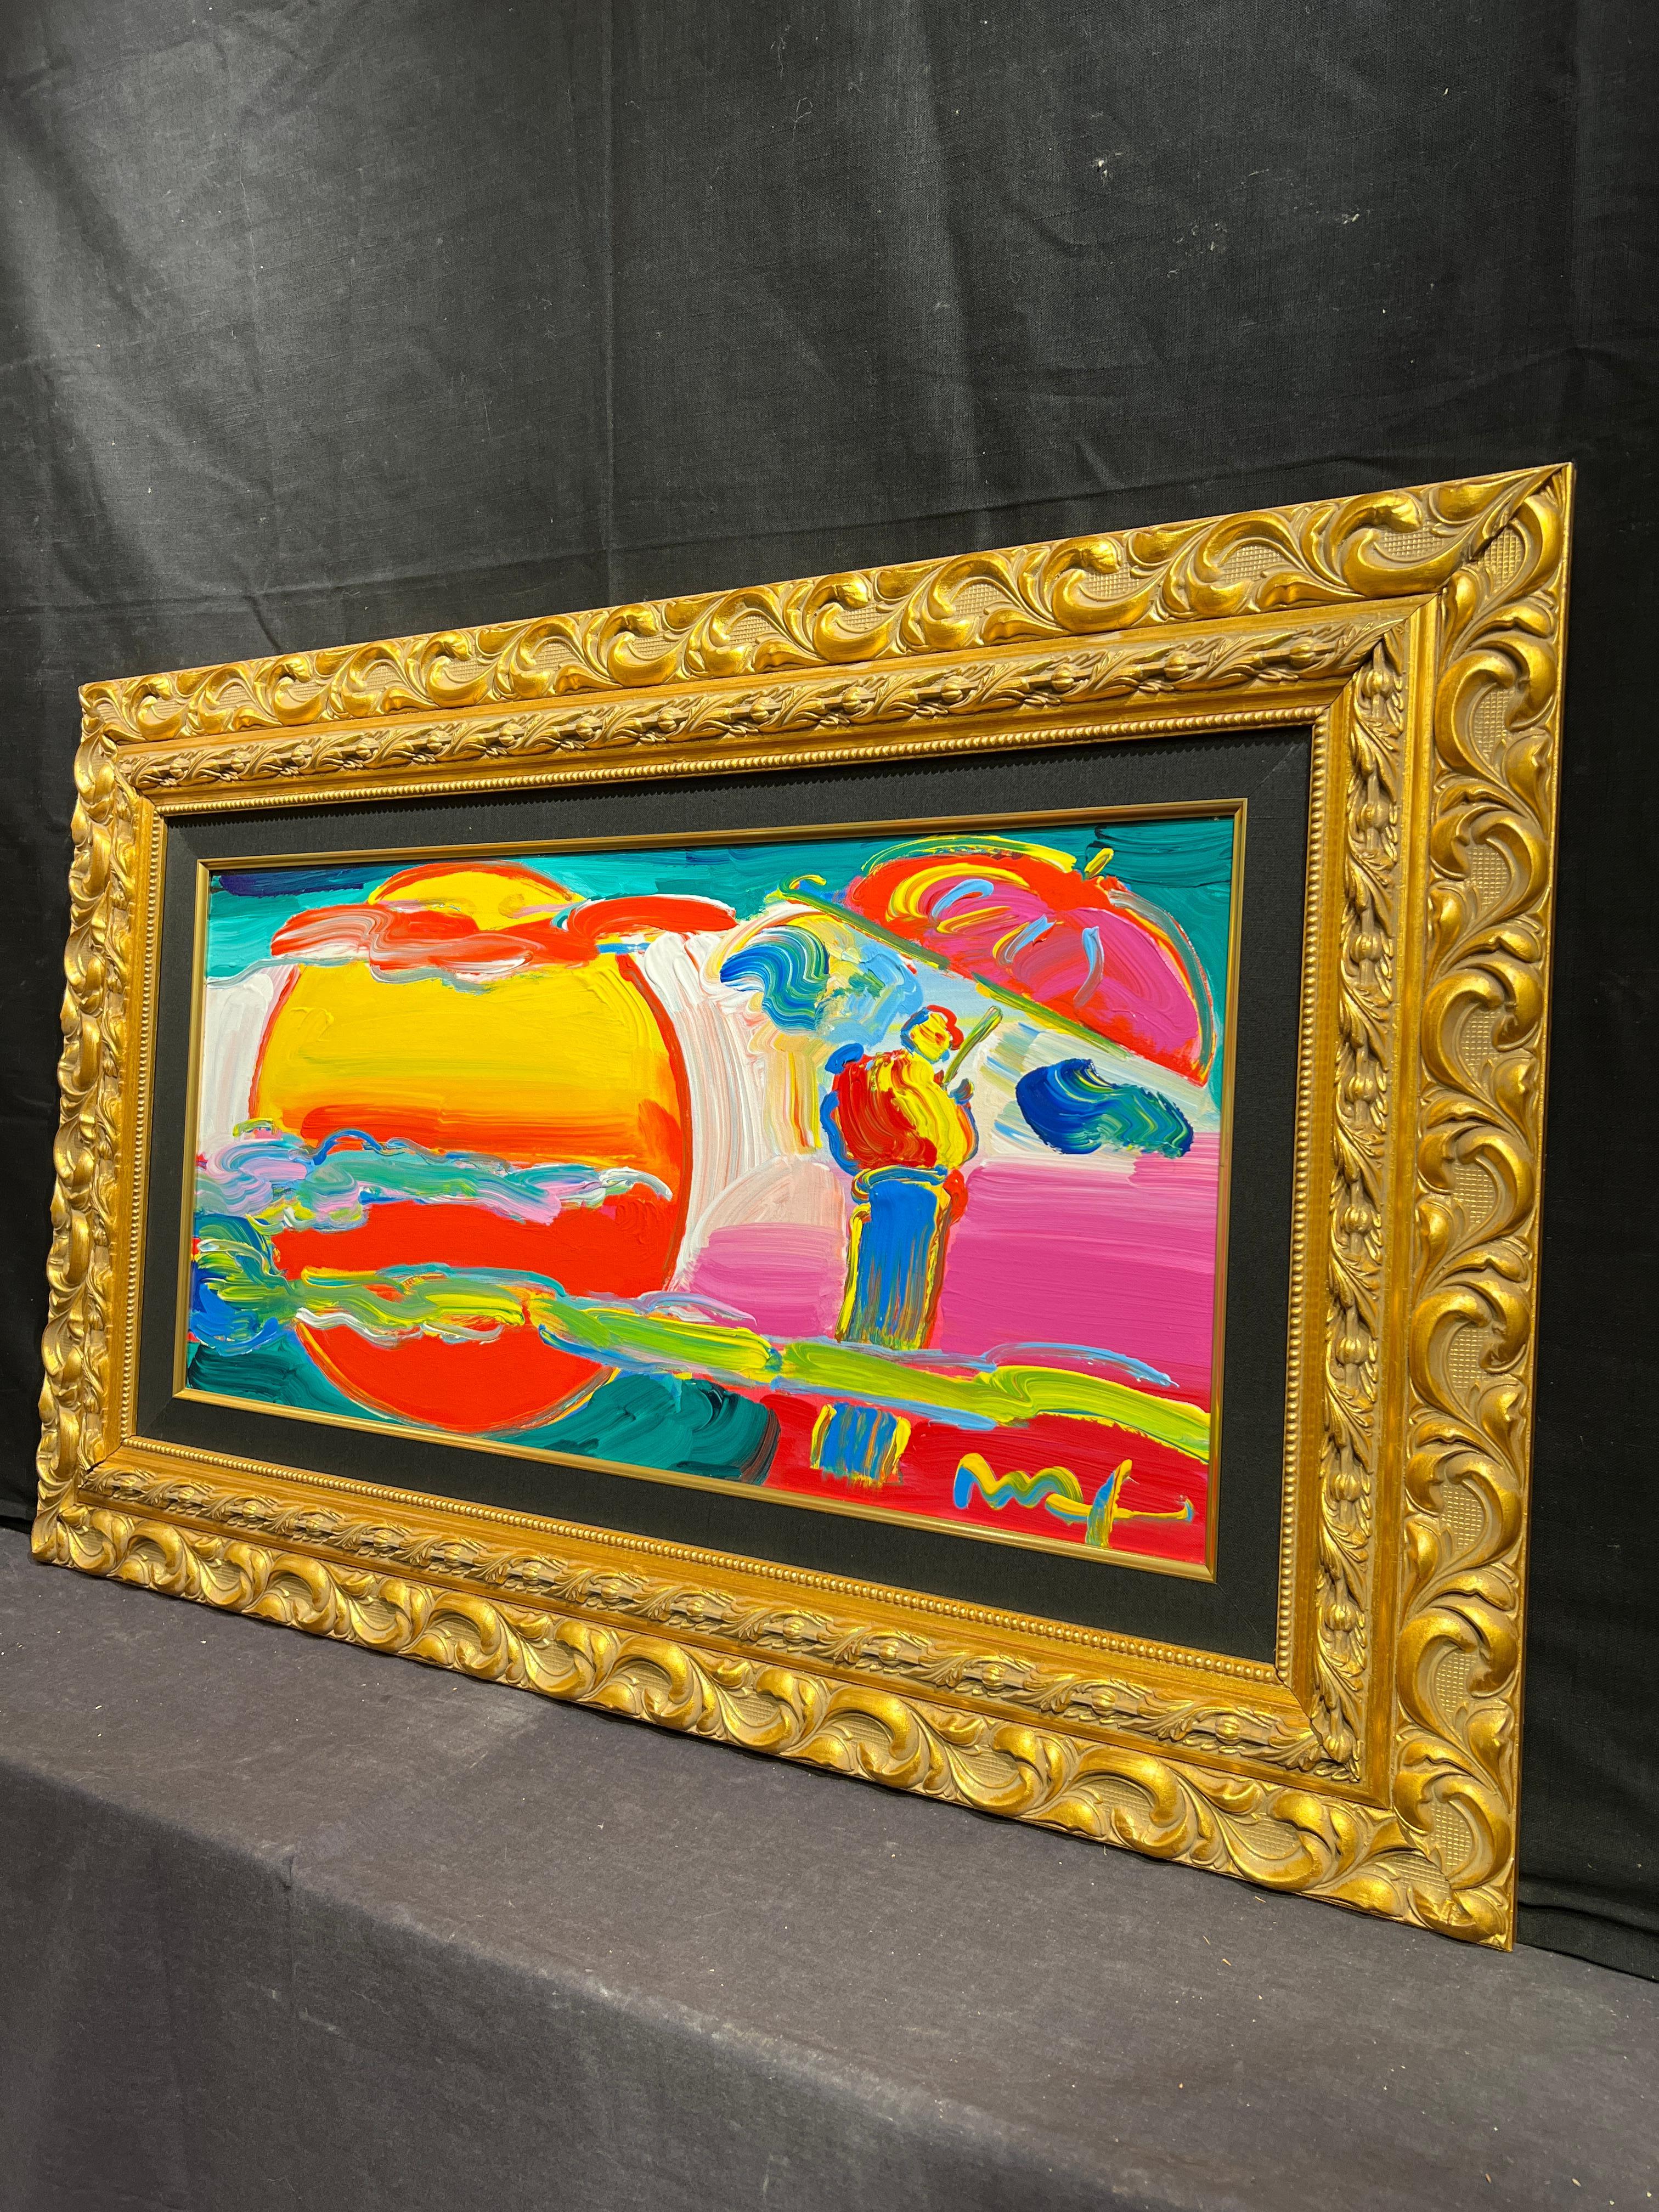 New Moon Detail
Peter Max (German, b. 1937)
Acrylic on Canvas
15 x 30 inches
26 x 41 inches with frame
Signed lower right

